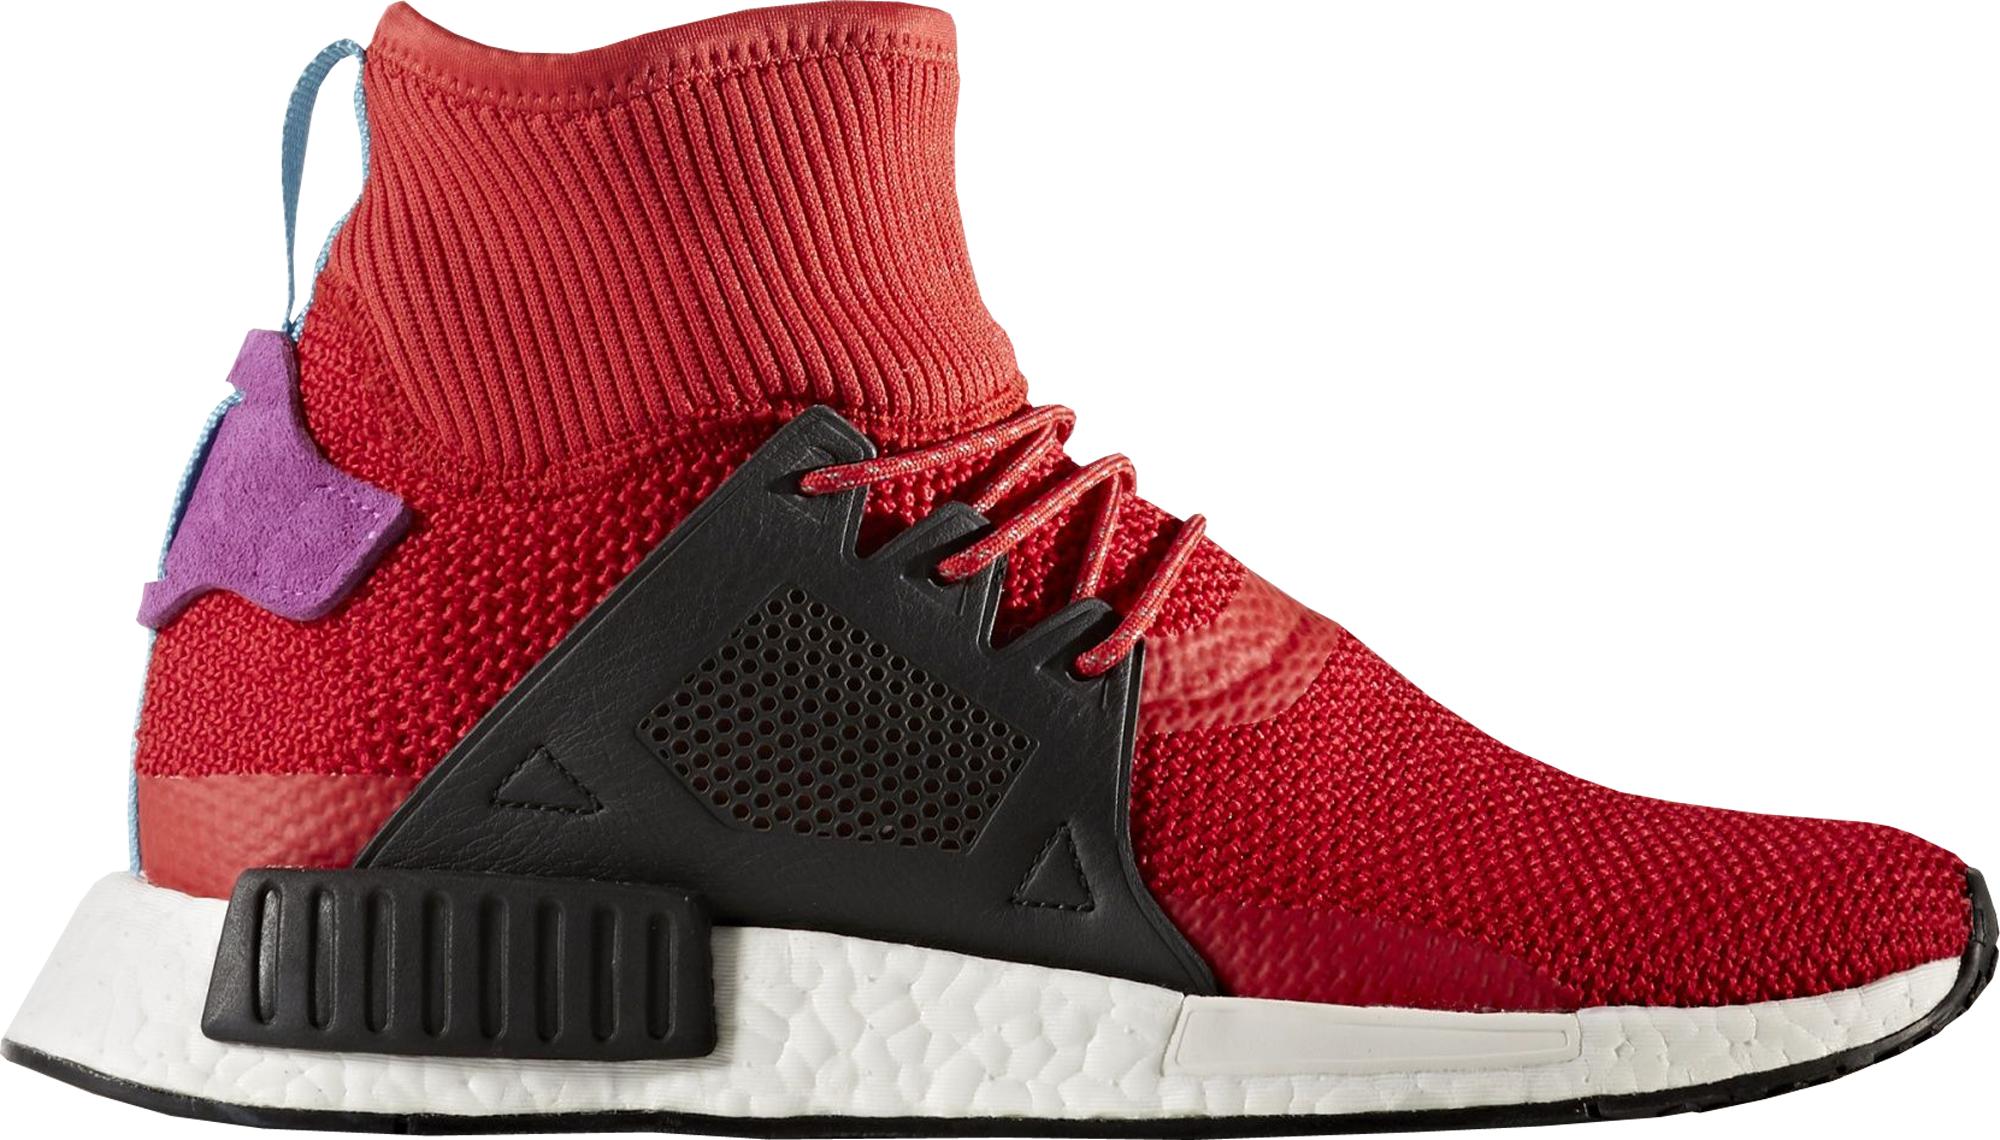 Brown NMD XR1 Primeknit adidas US Dialysis Services Inc.